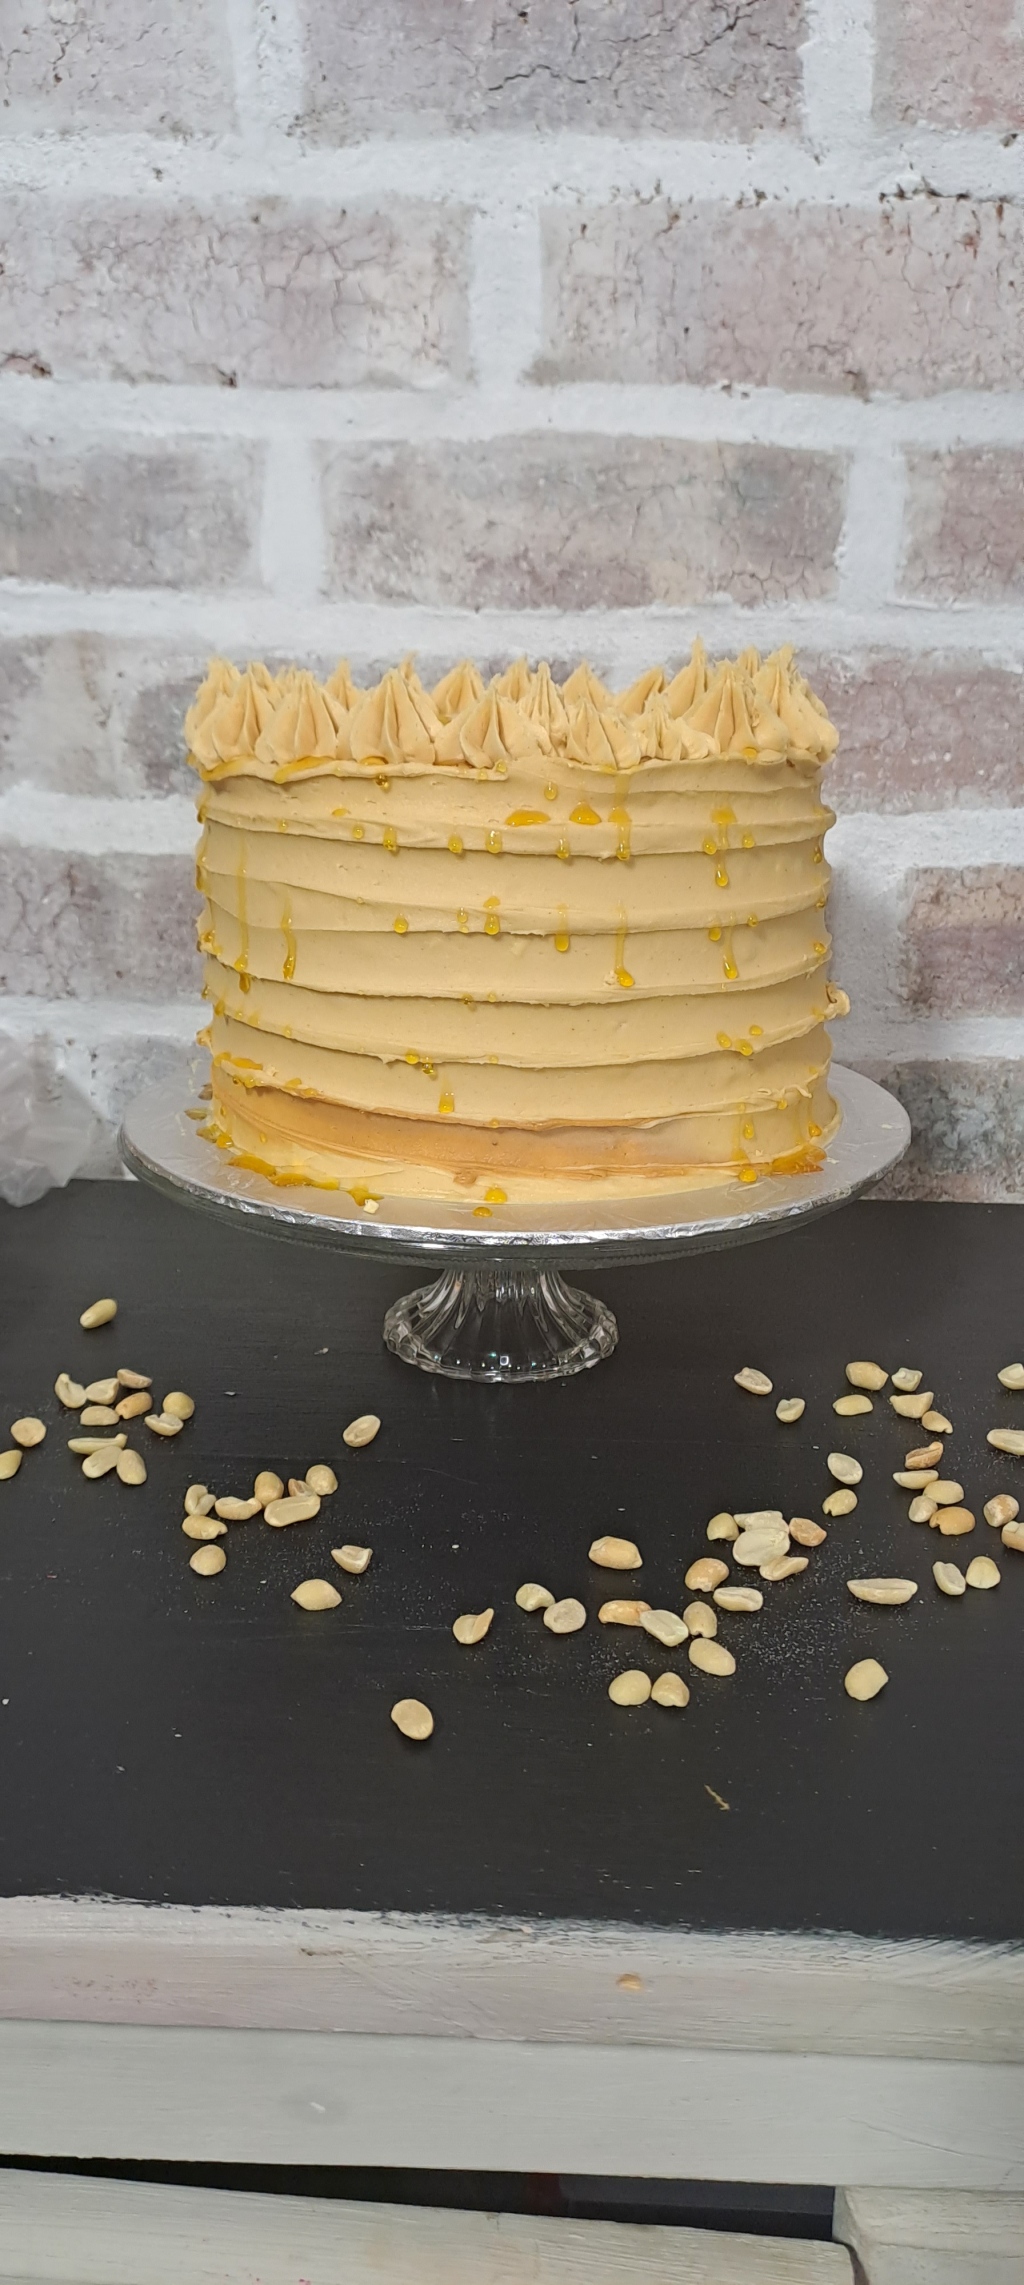 Peanut Butter and Syrup Delight Cake